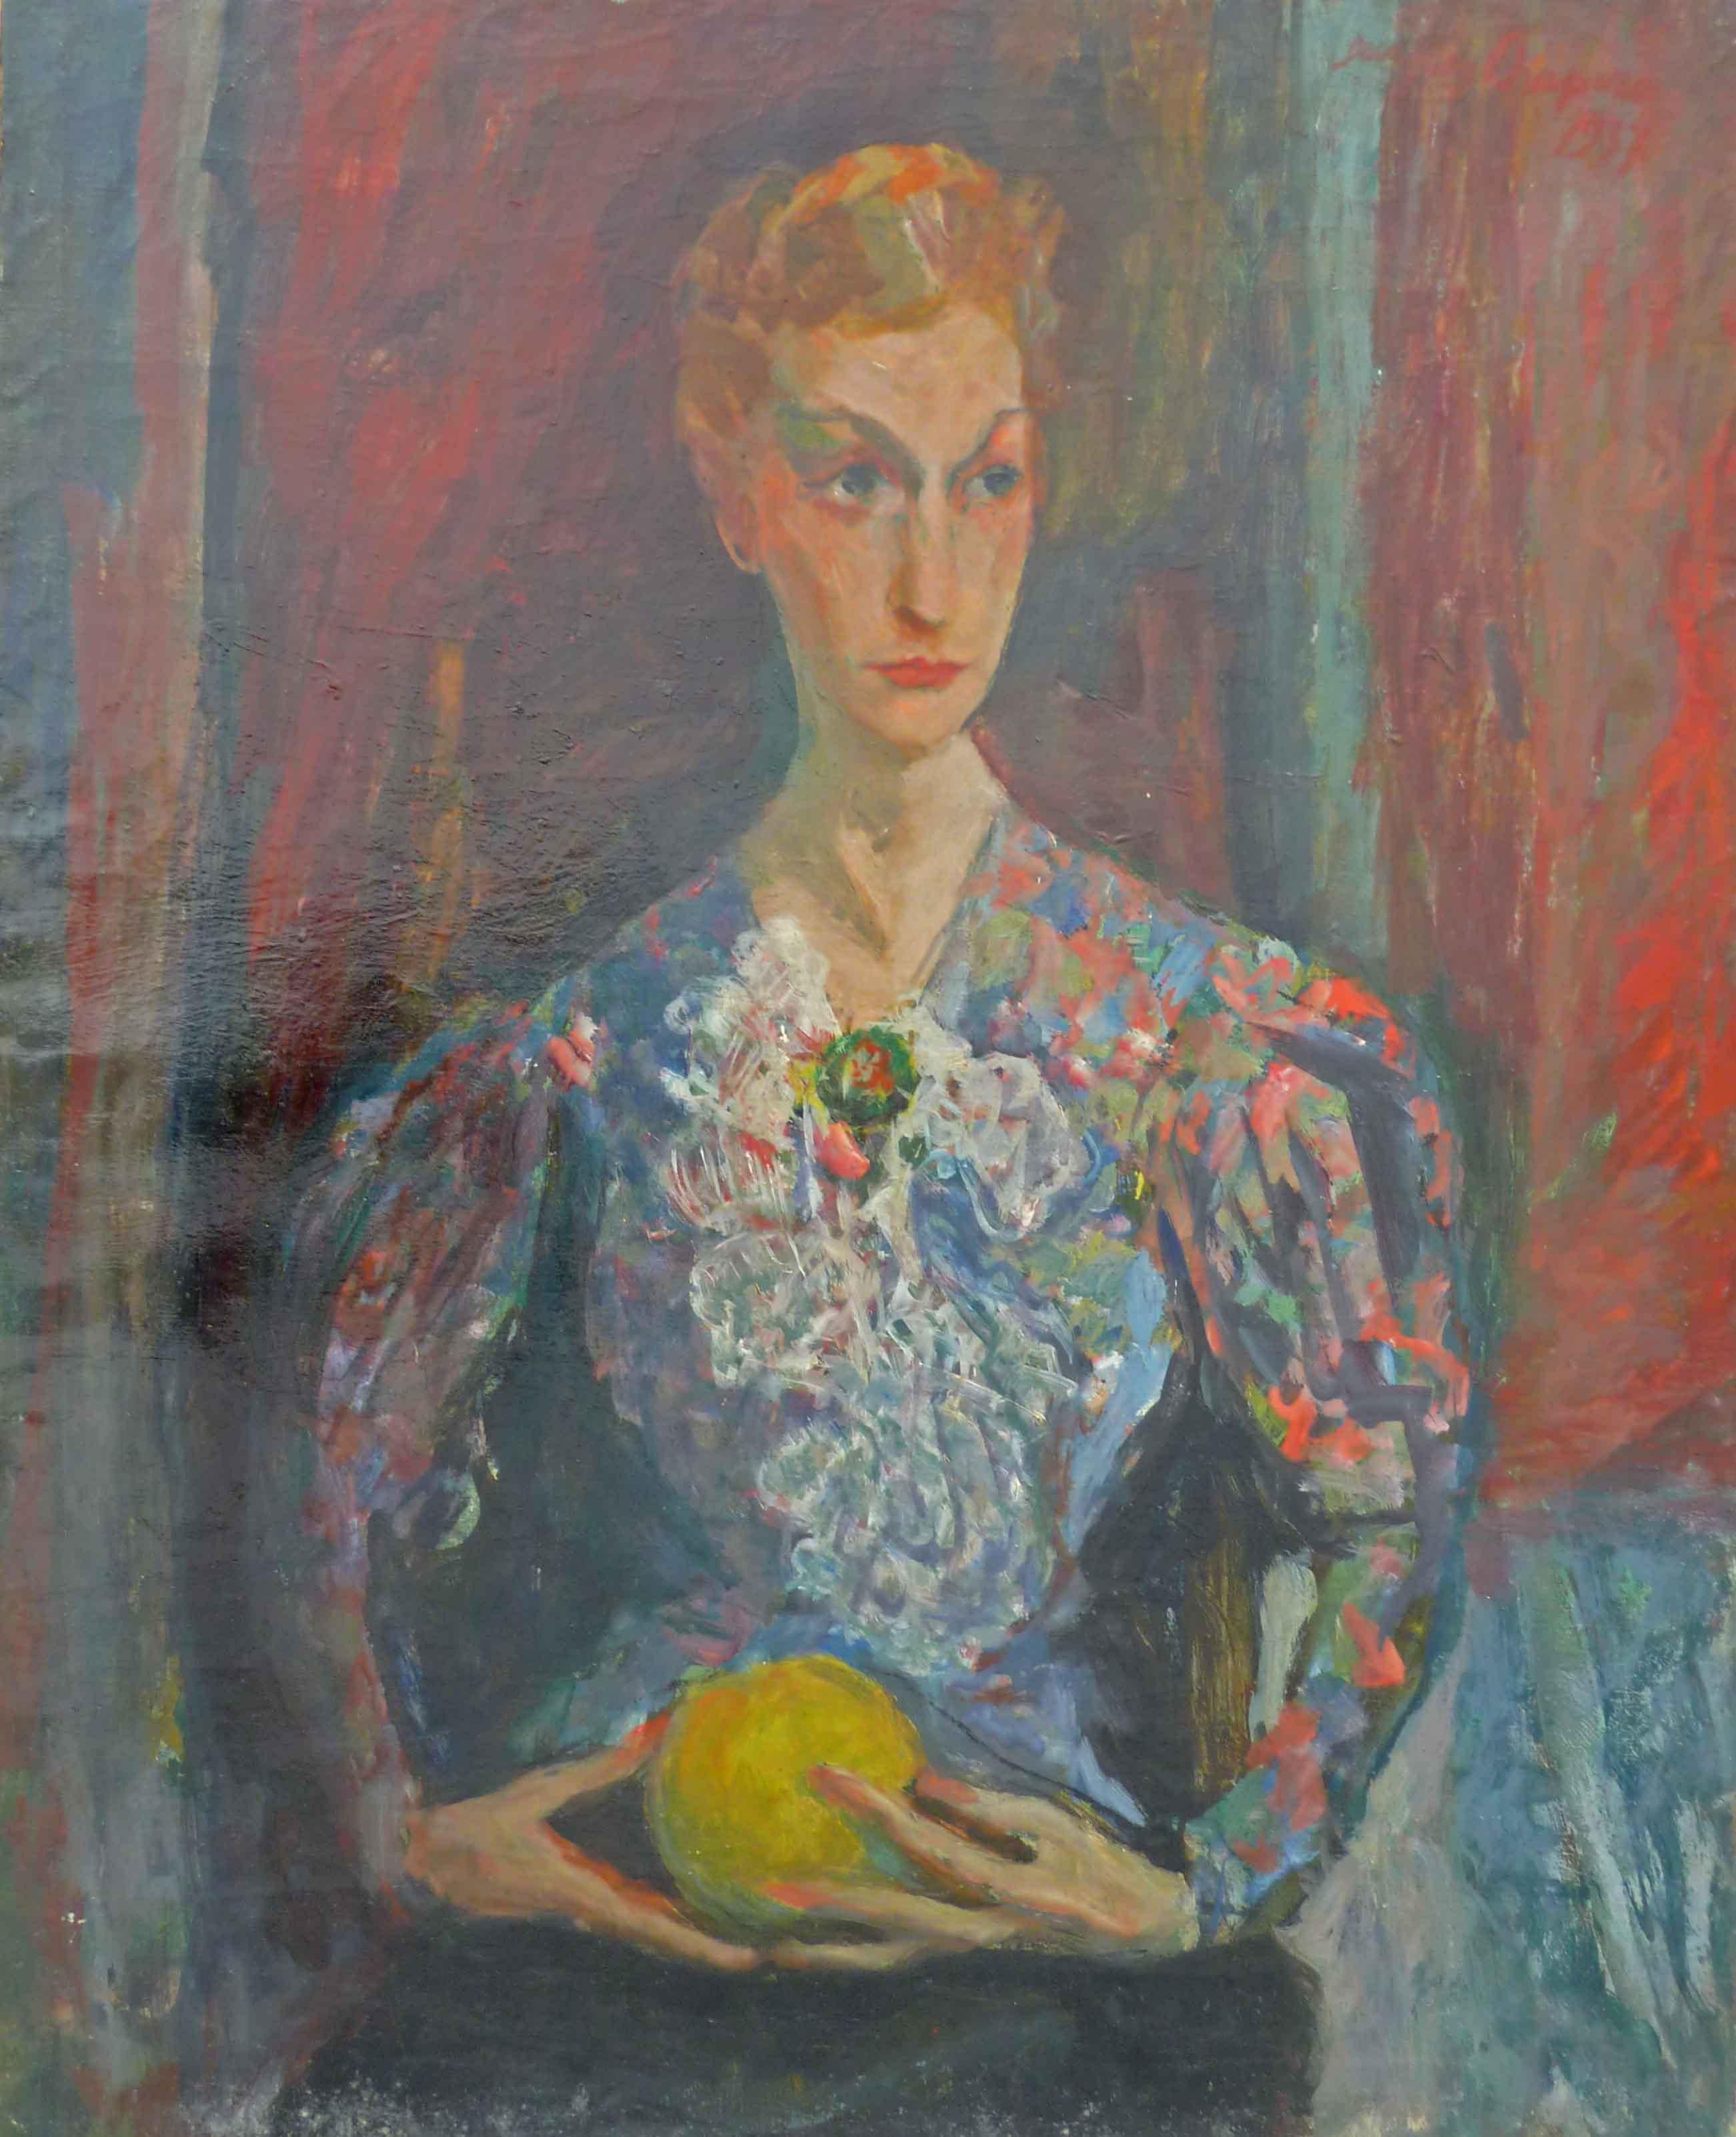 Woman Holding an Orange - Painting by Jacques Chapiro